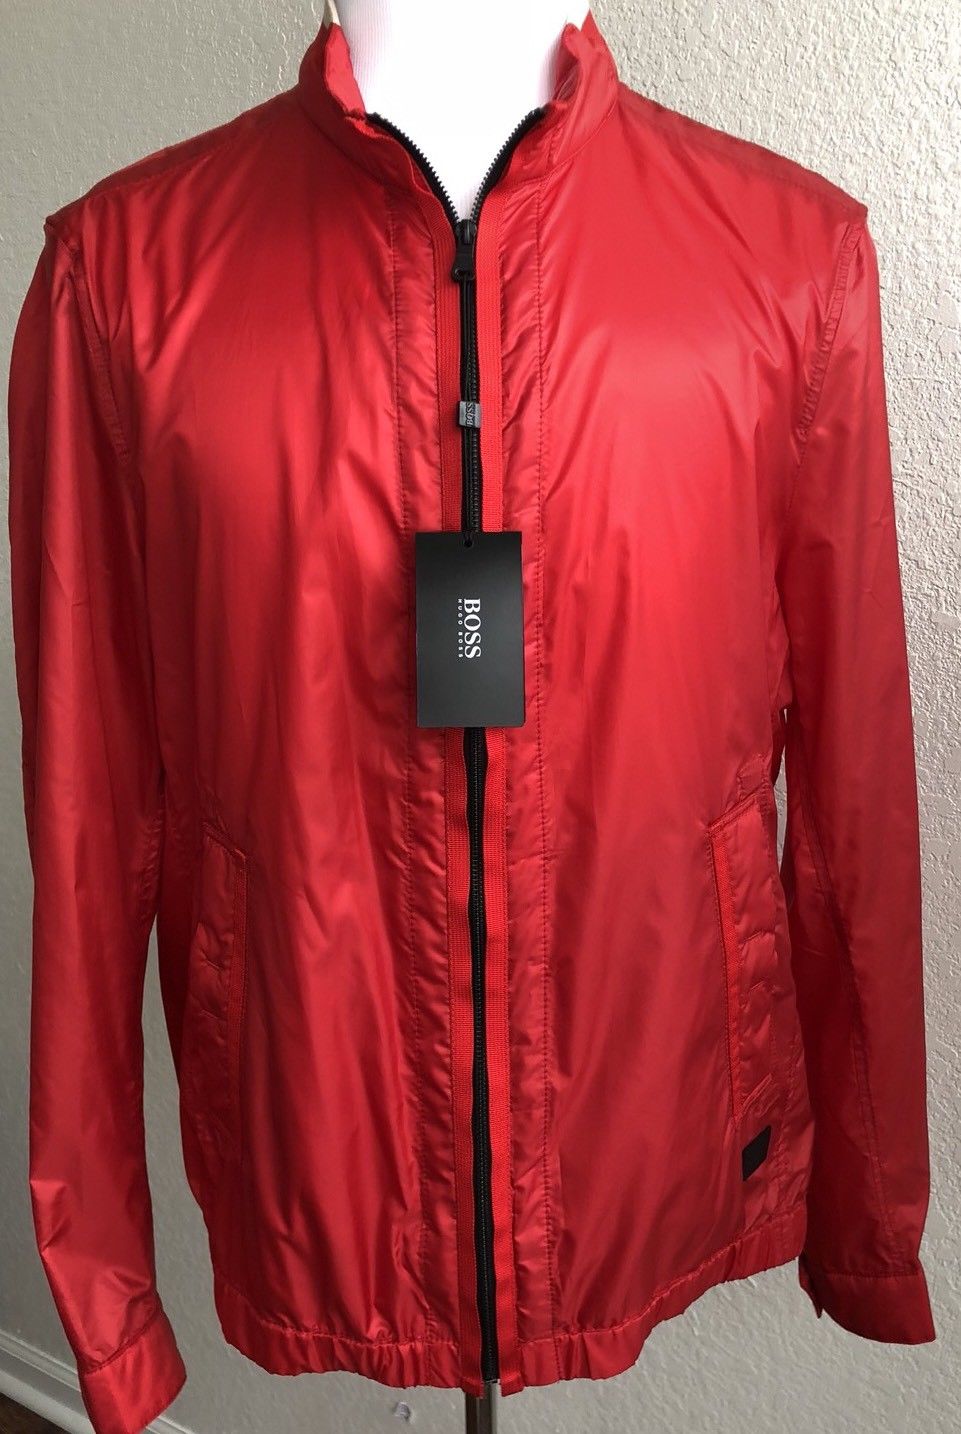 NWT $395 Boss Hugo Boss Black Label Collins Rain Jacket Bright Red Size 44R US - BAYSUPERSTORE